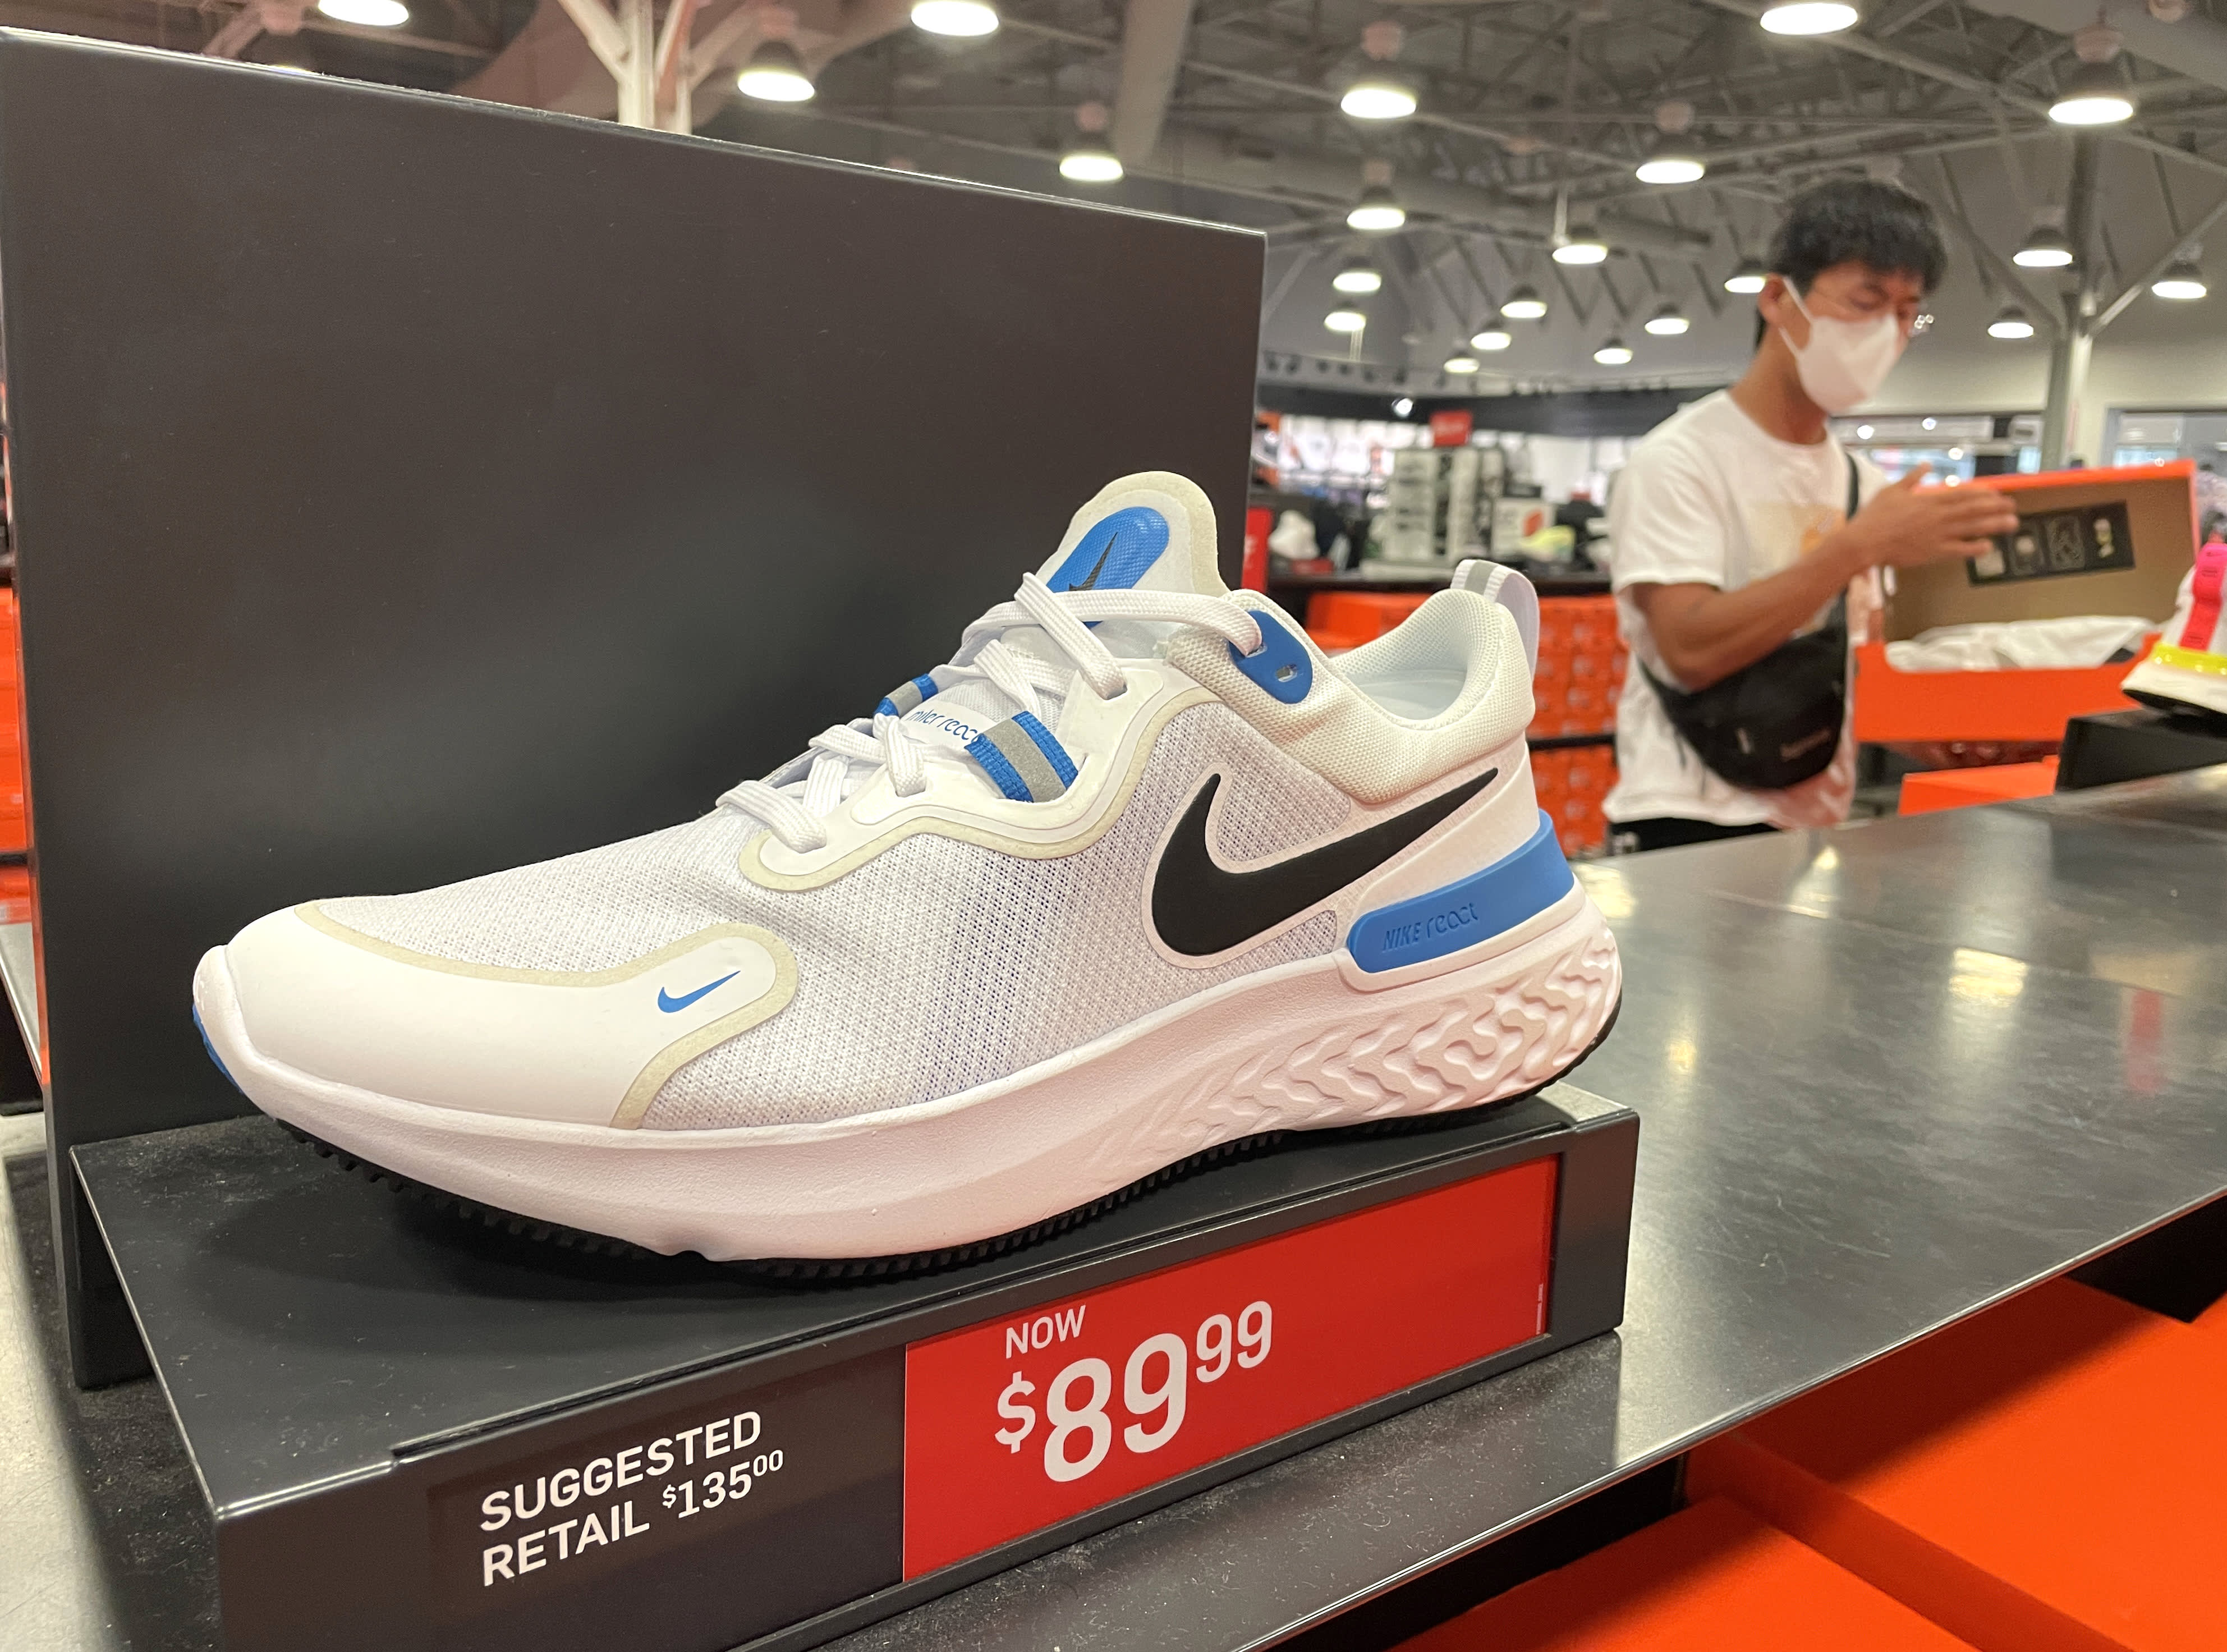 Why some analysts think investors should buy Nike after its latest earnings report